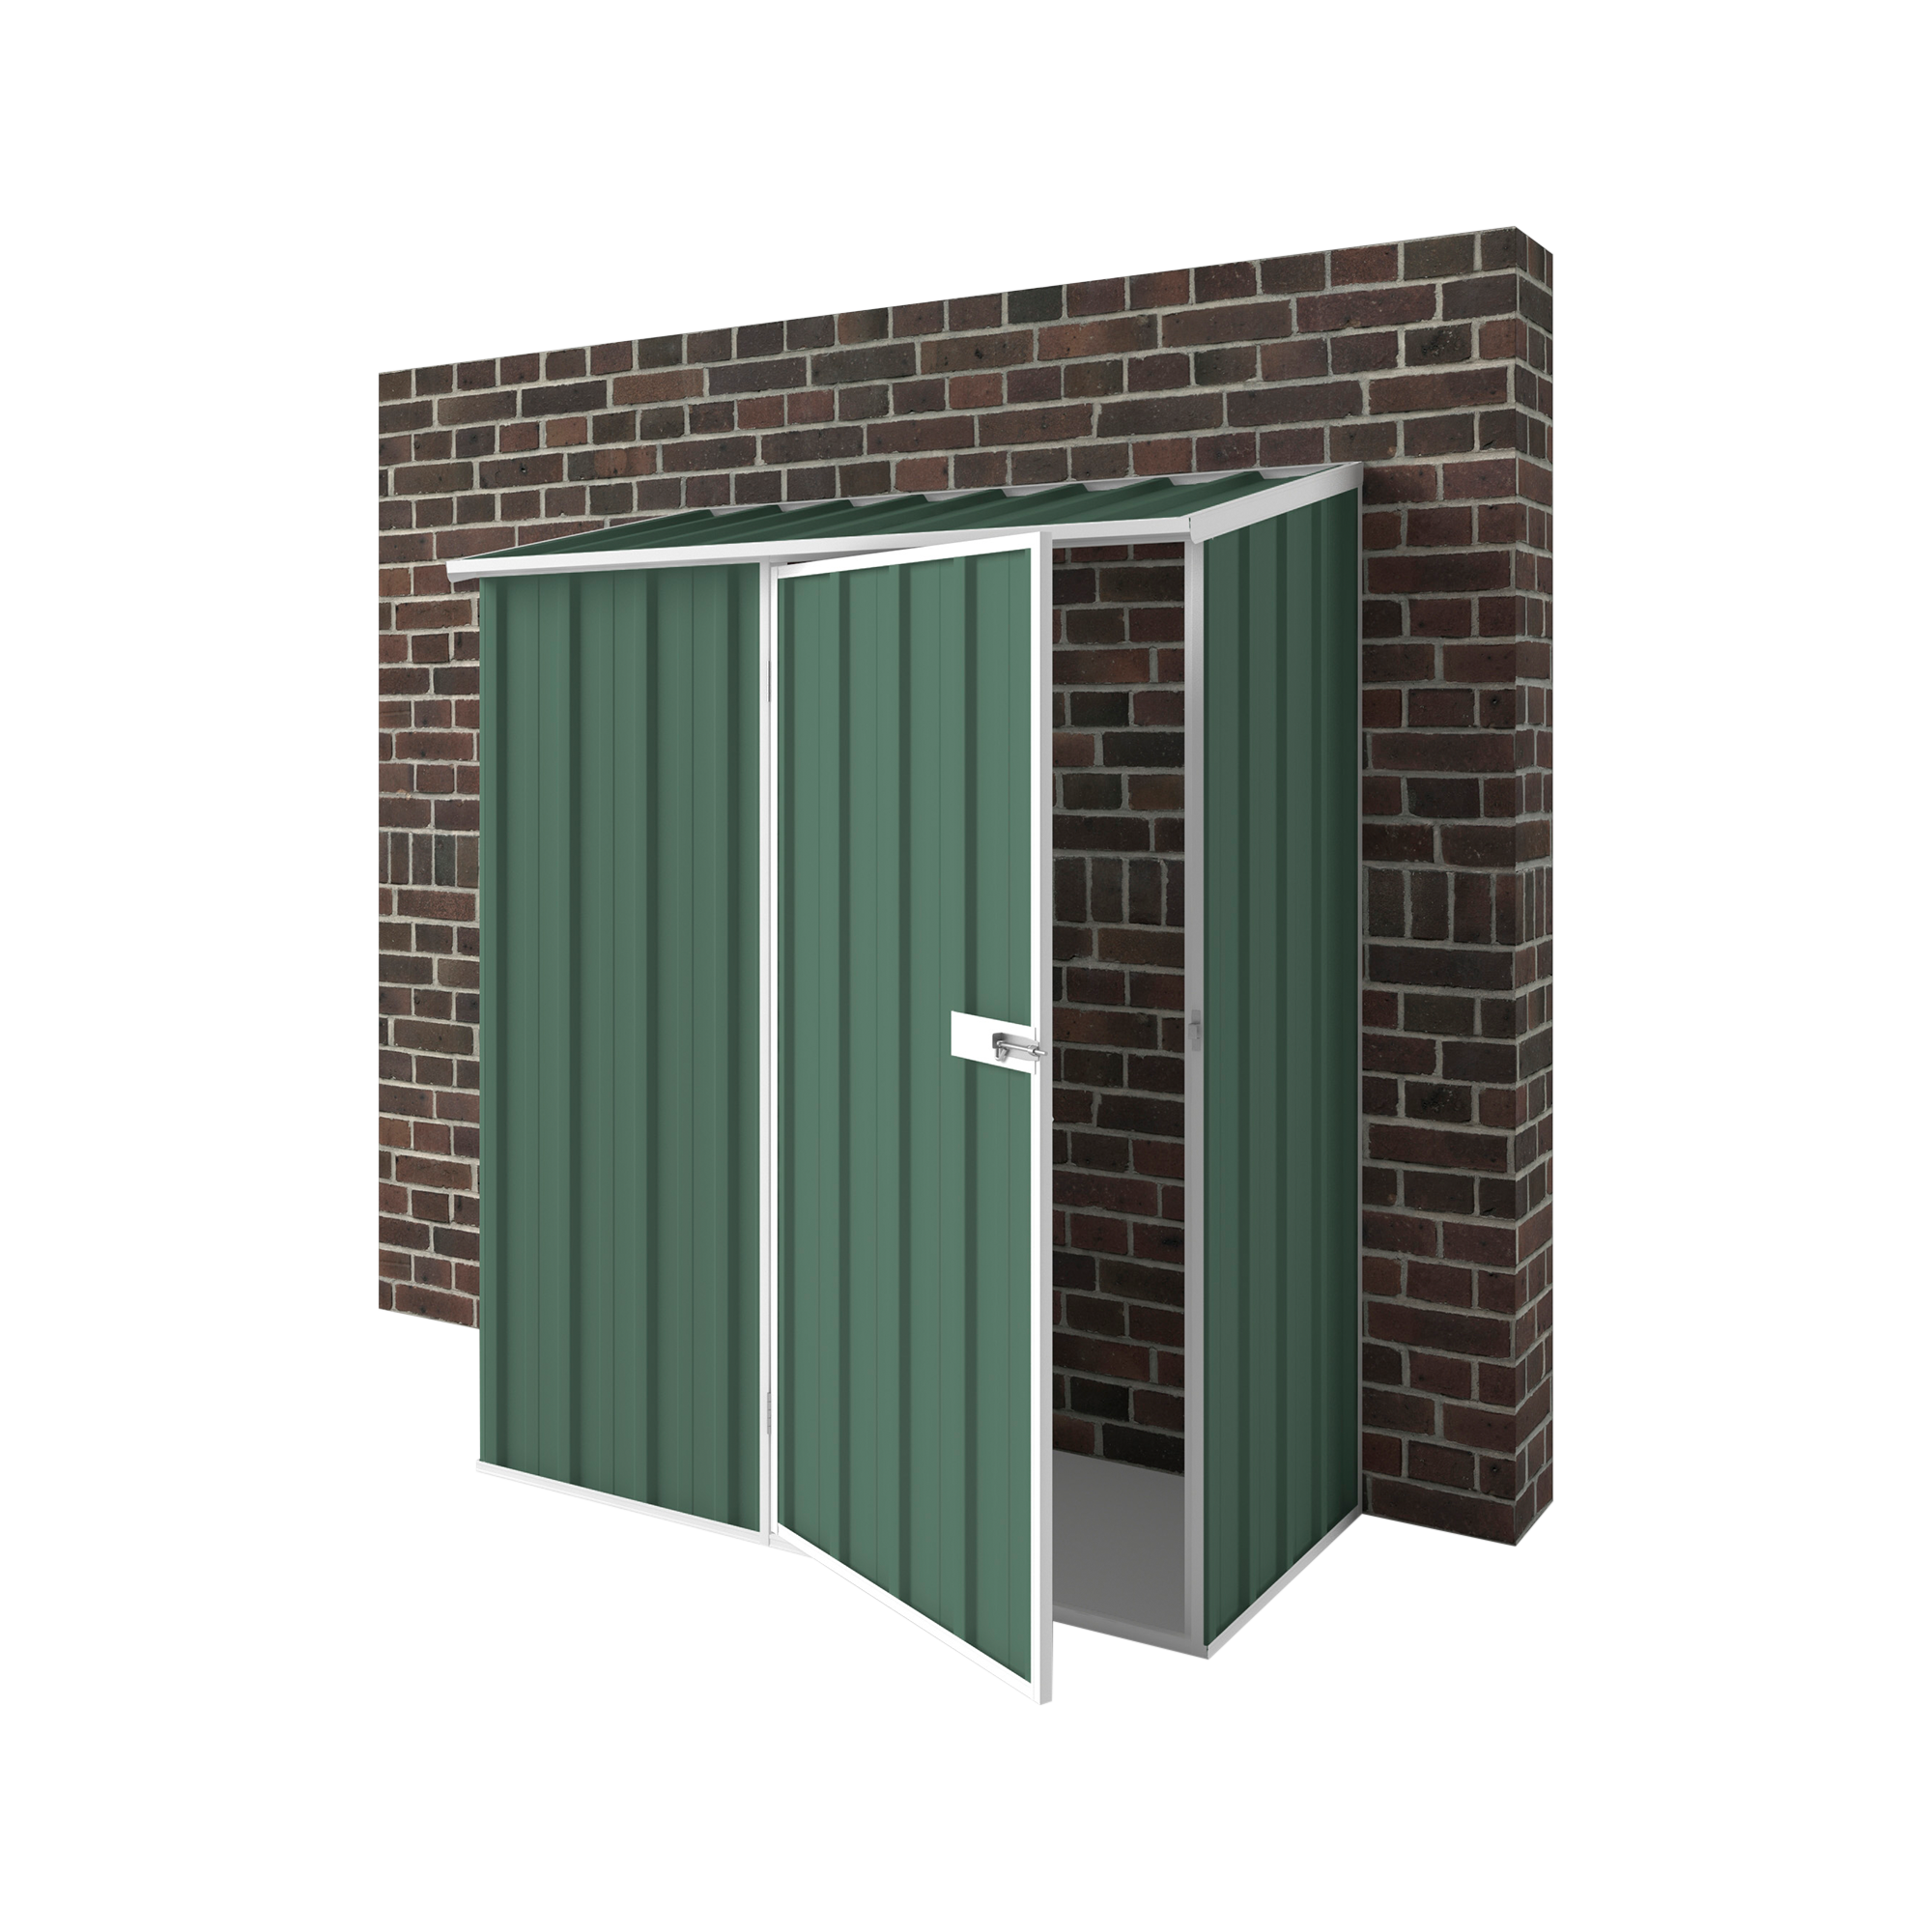 1.5m x 0.78m Off The Wall Garden Shed - EasyShed